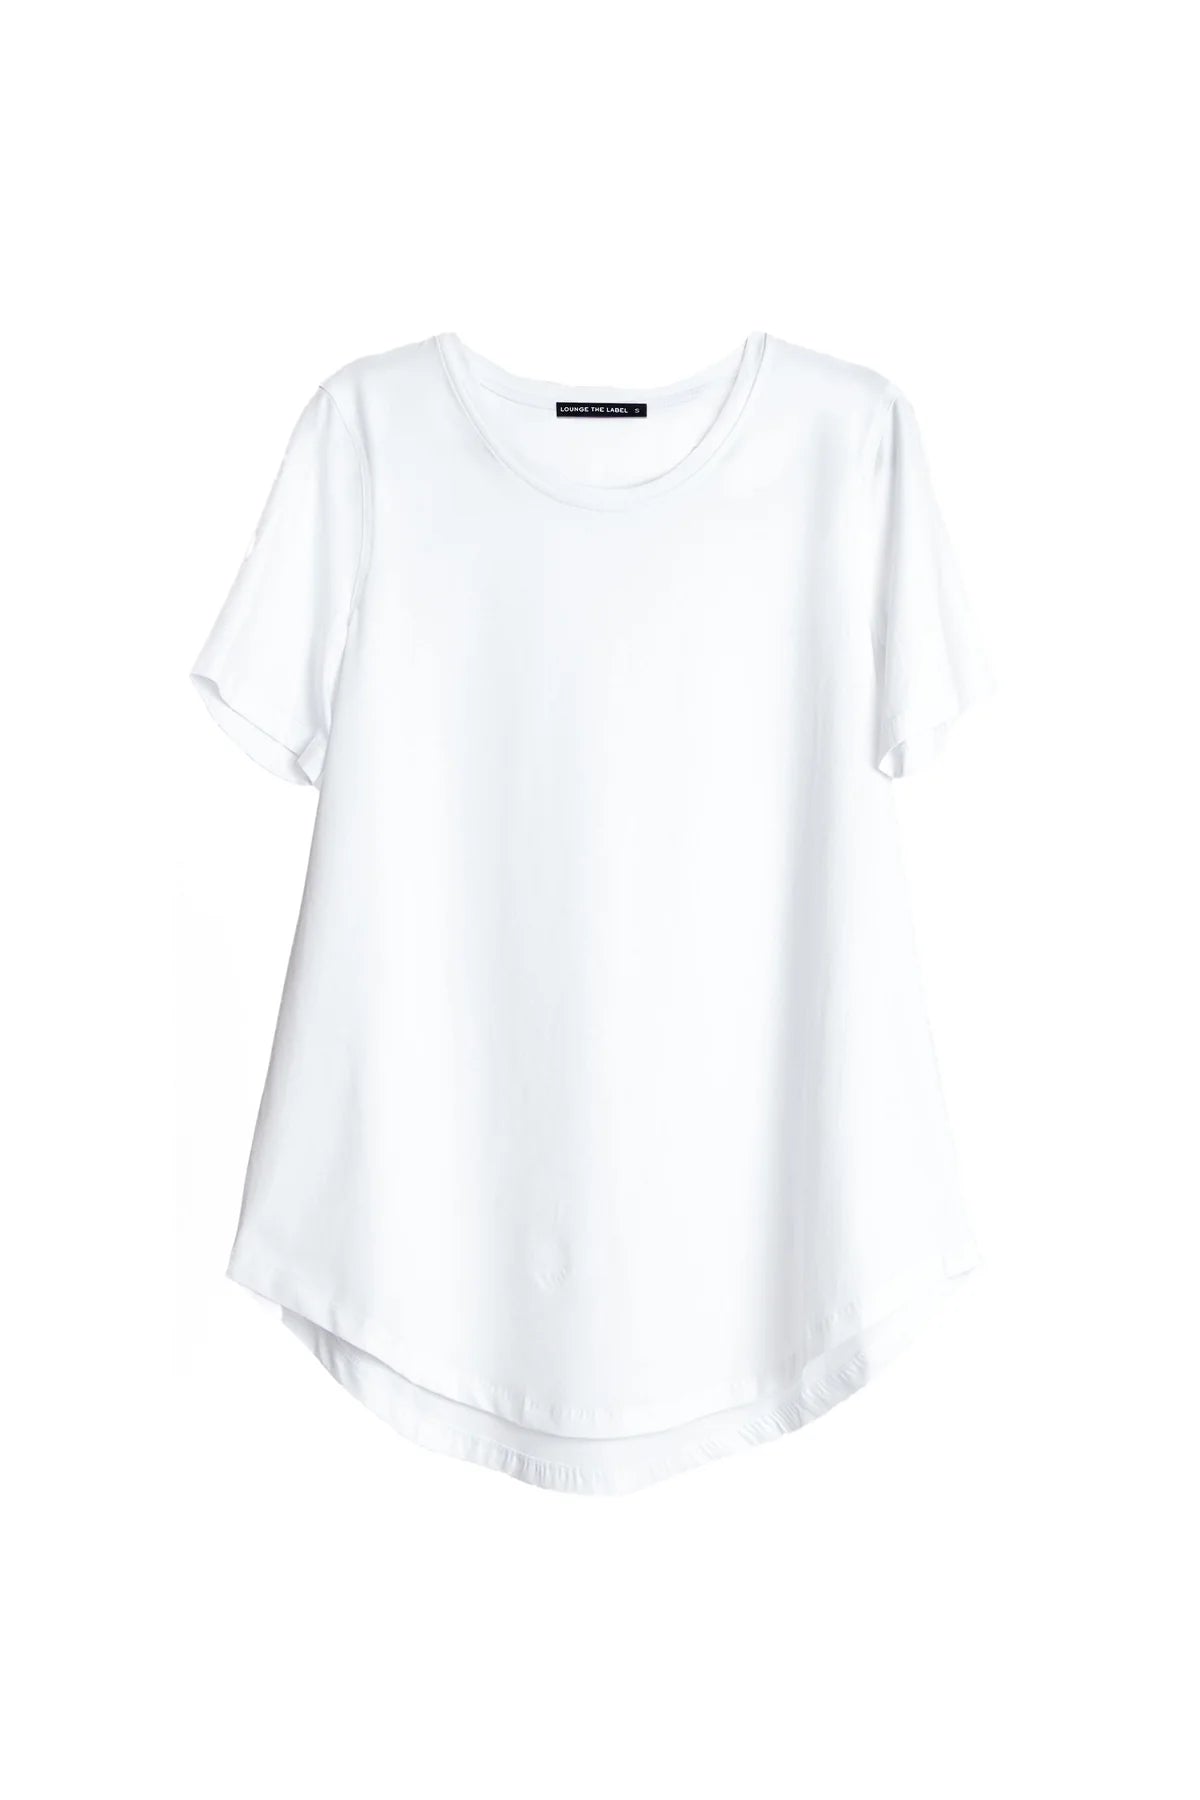 Lounge The Label Round Neck Top - Sien